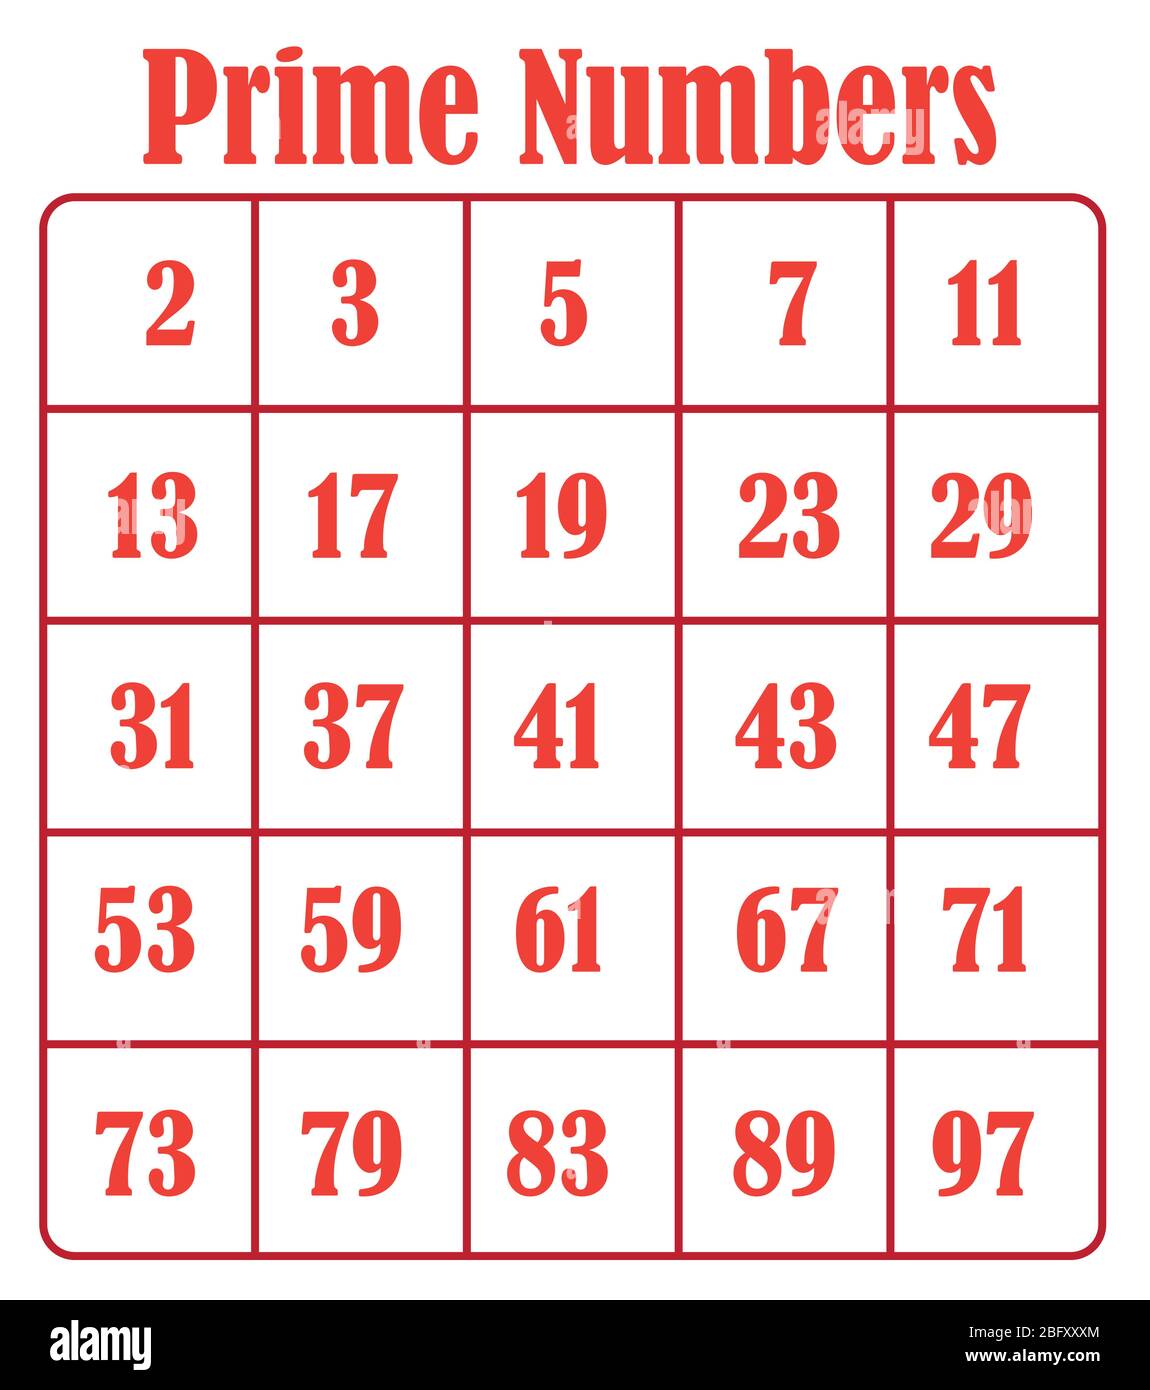 Prime Numbers Between 1 And 100 Stock Vector Image Art Alamy